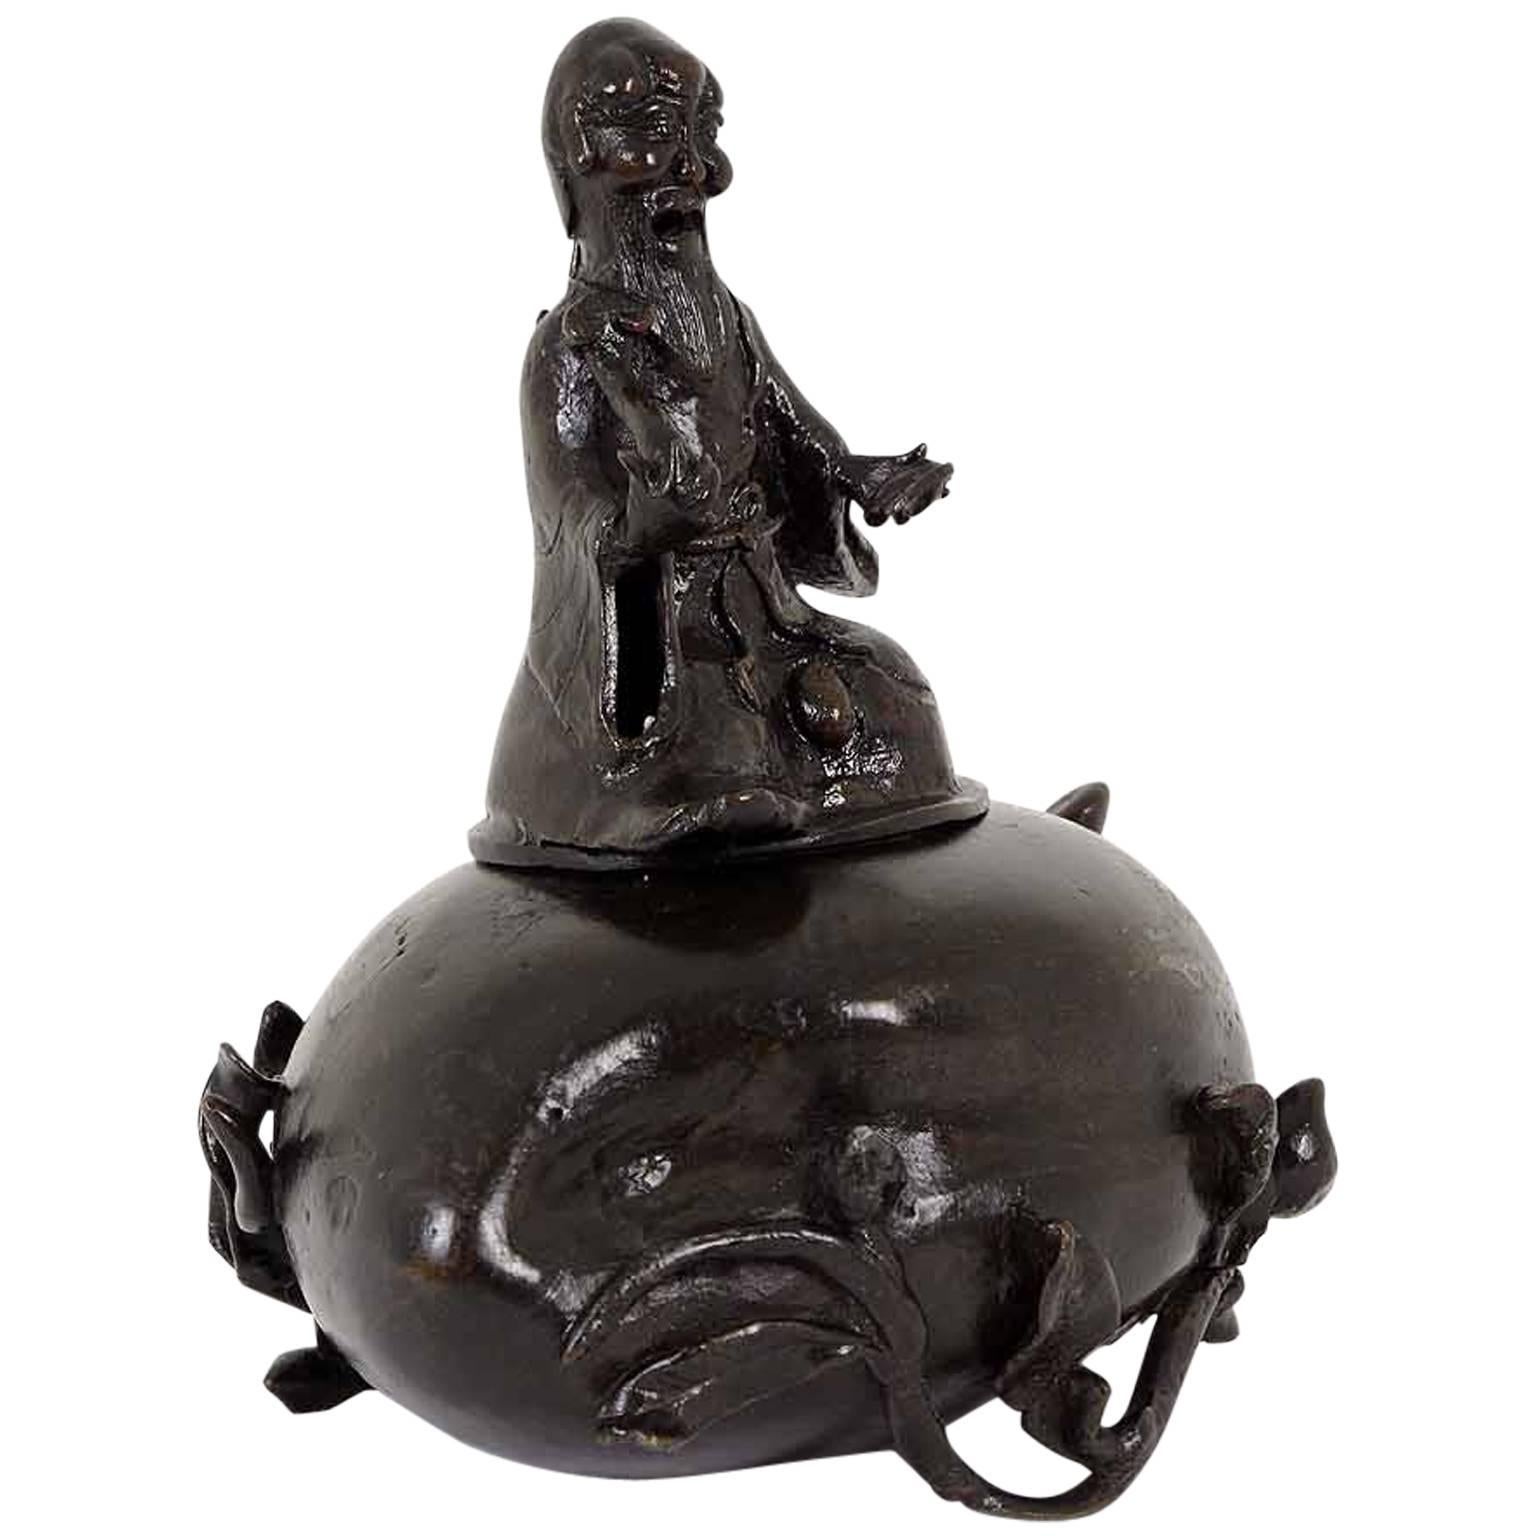 Wonderful 19th Century Chinese Bronze Censer, Incense Burner with Cover